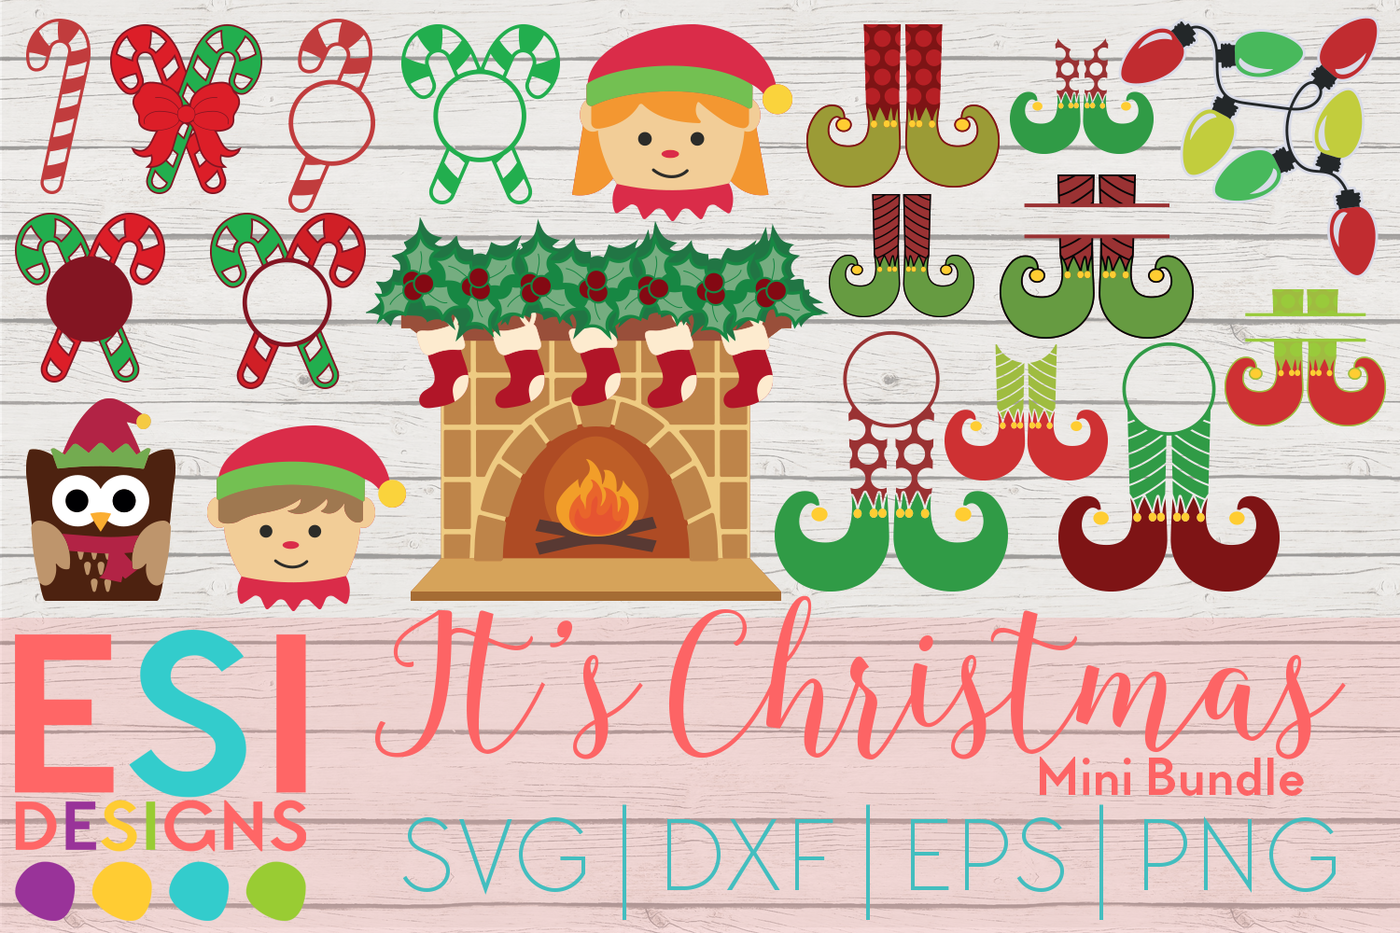 Download It's Christmas Mini Bundle | SVG, DXF, EPS, PNG By ESI ...